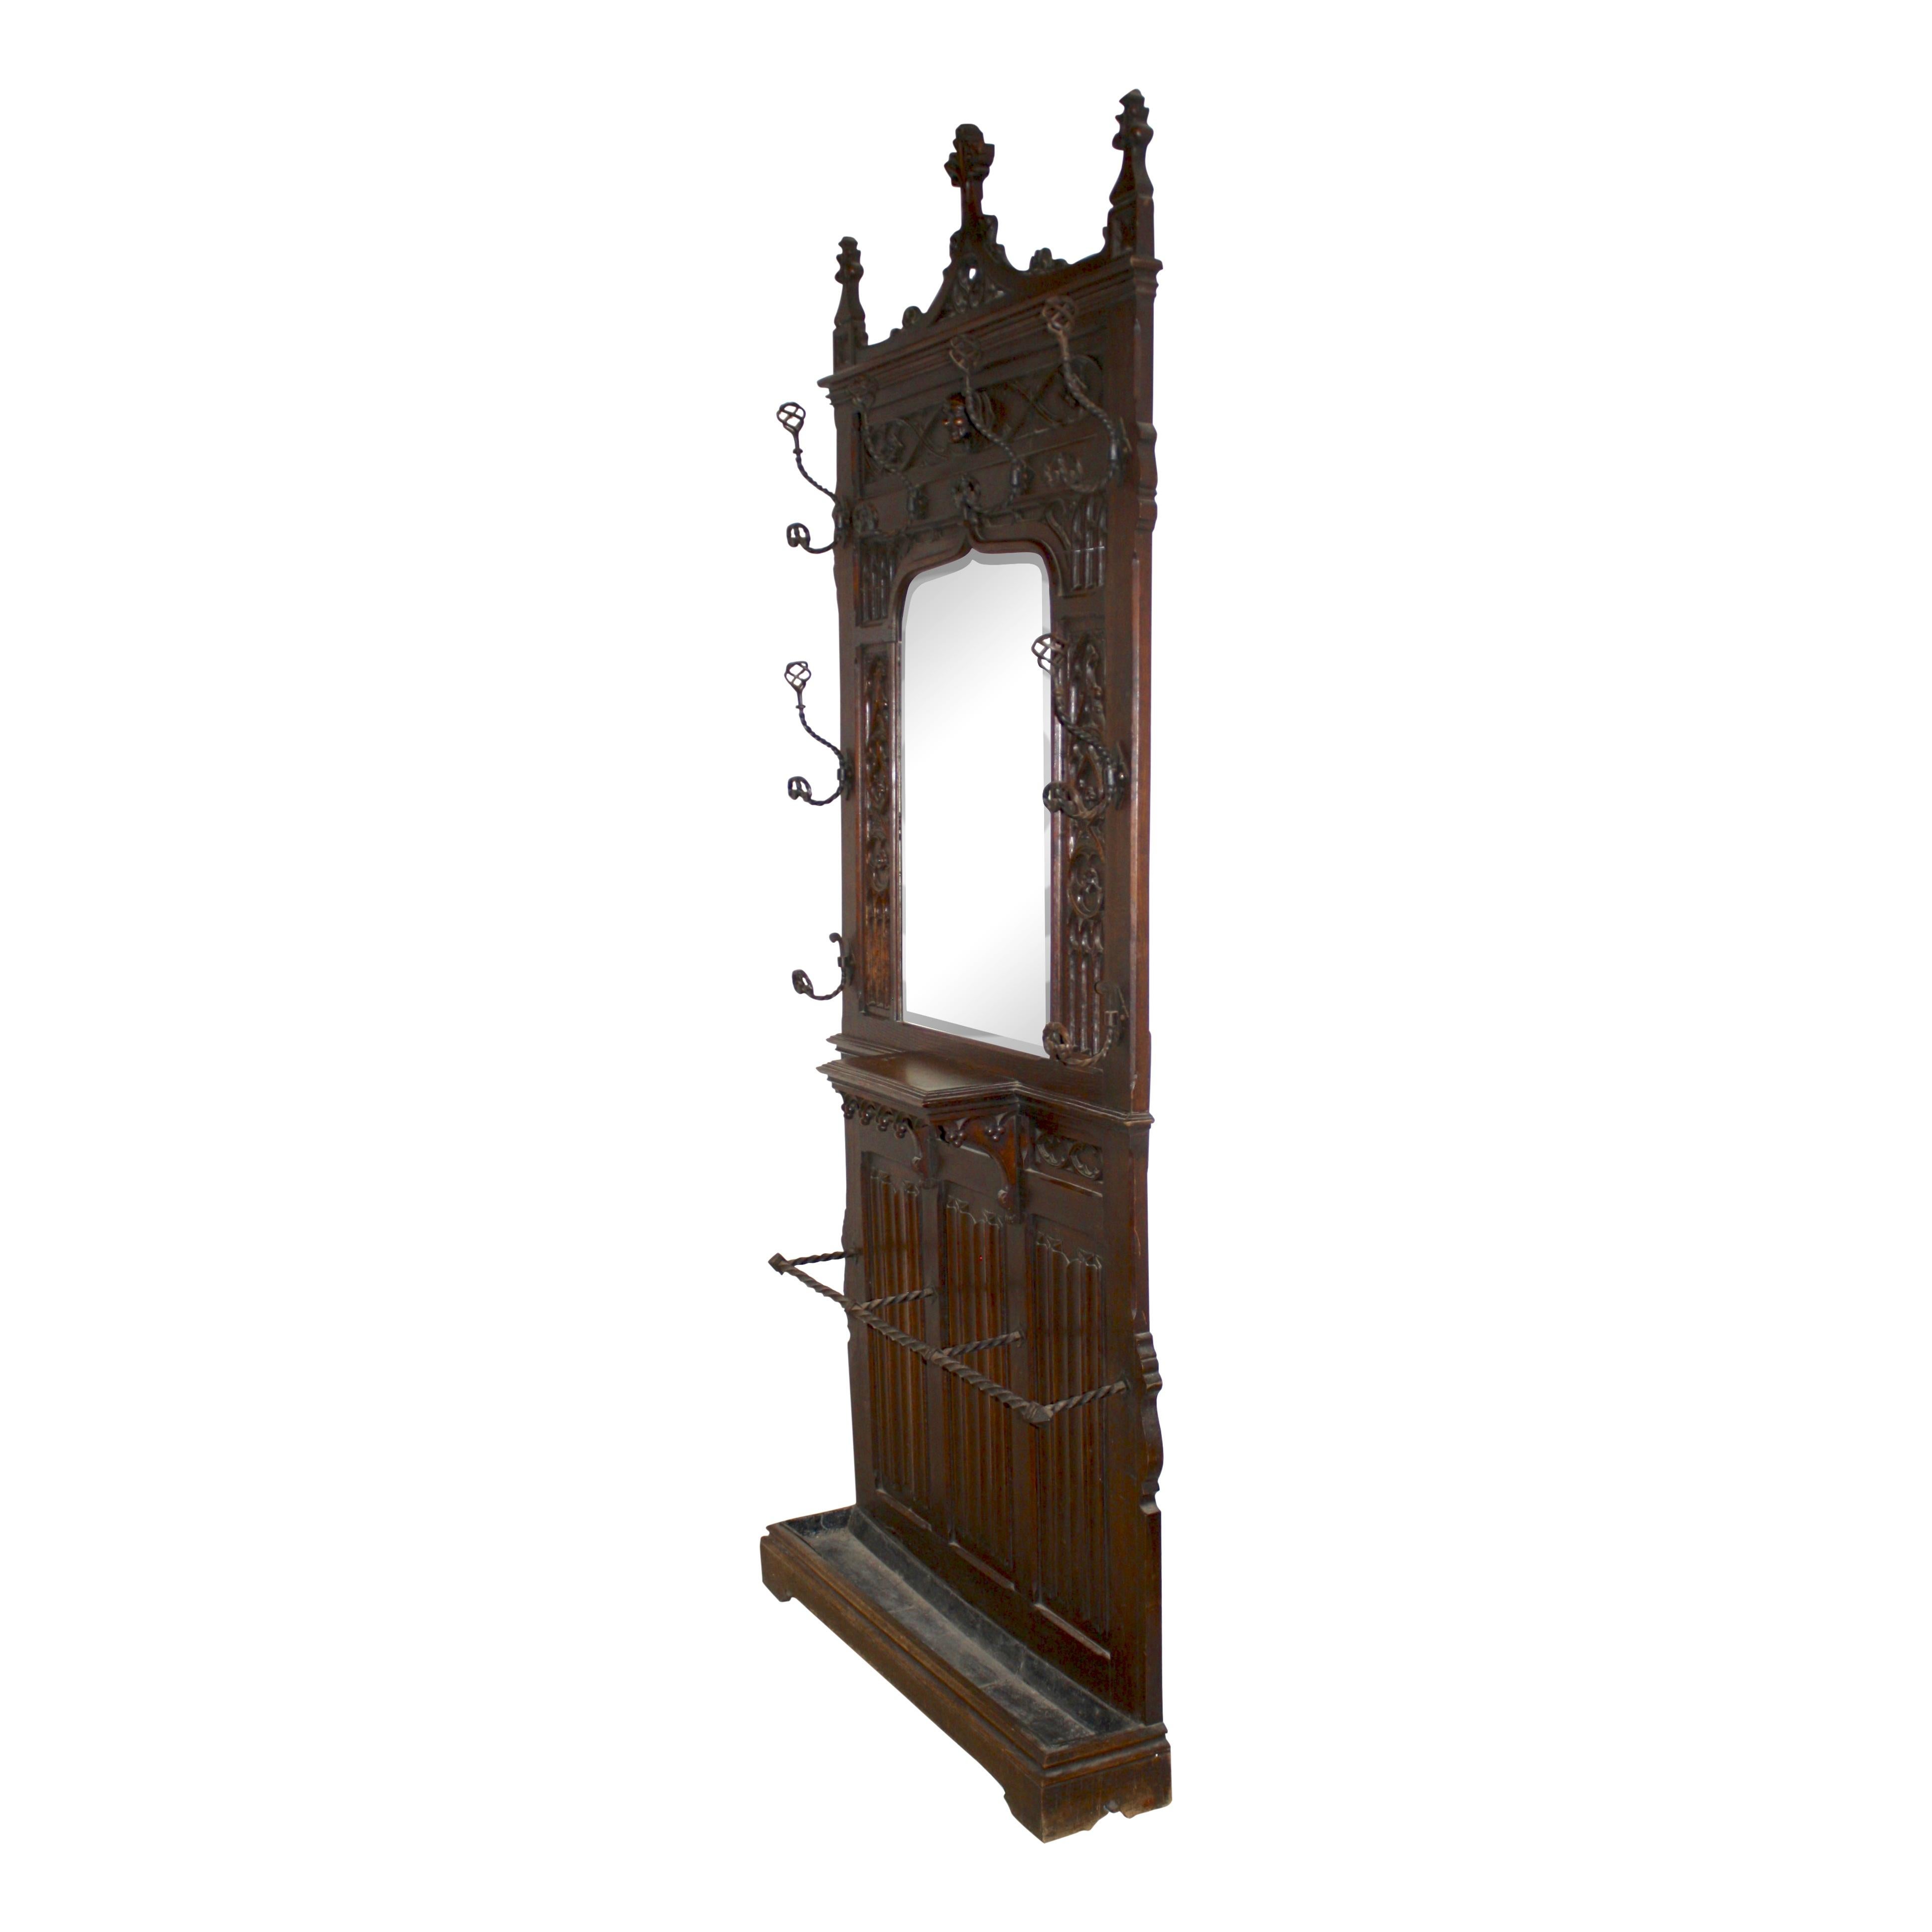 Standing just over eight feet tall, this oak hall stand makes an impressive statement. It features high relief carvings, six double wrought iron hooks, two single wrought iron hooks, a carved head protruding over a shaped beveled mirror with